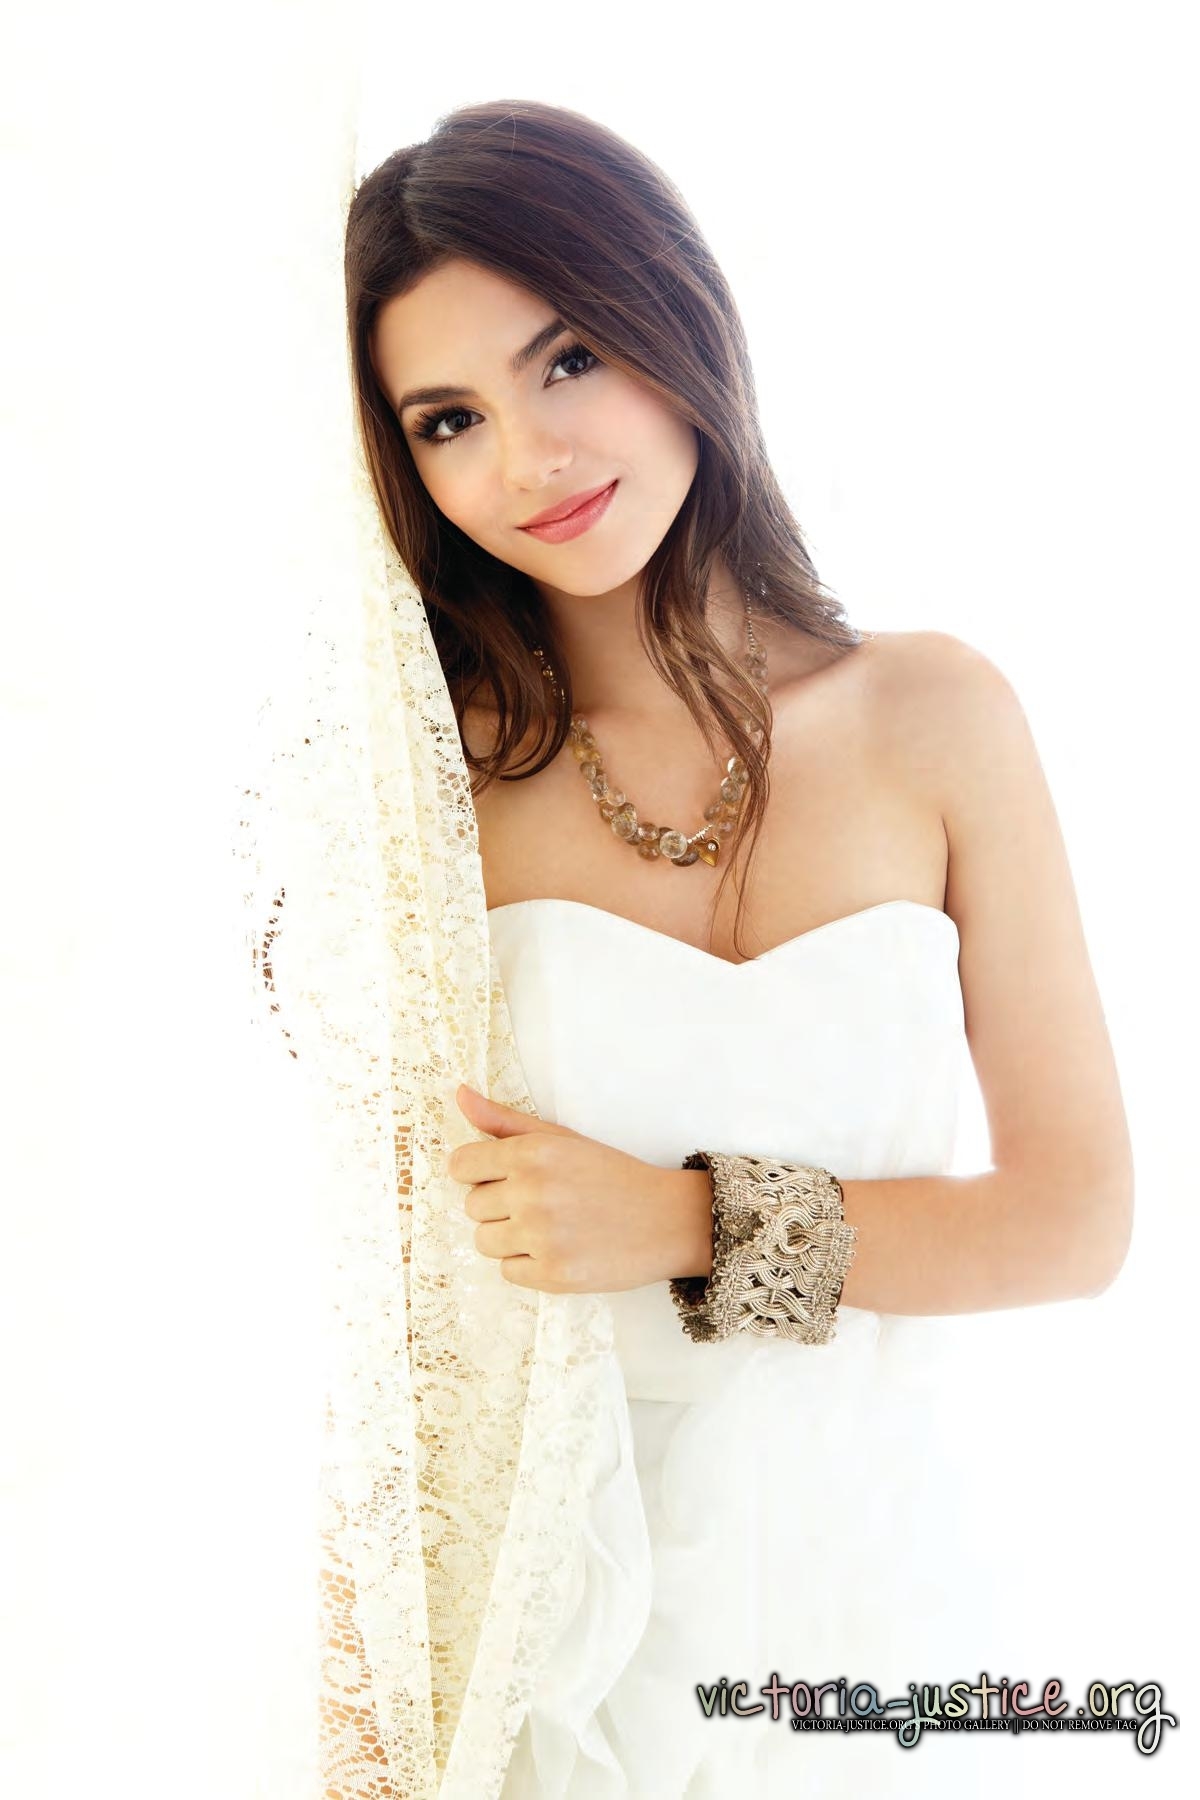 Is Victoria Justice Striptease